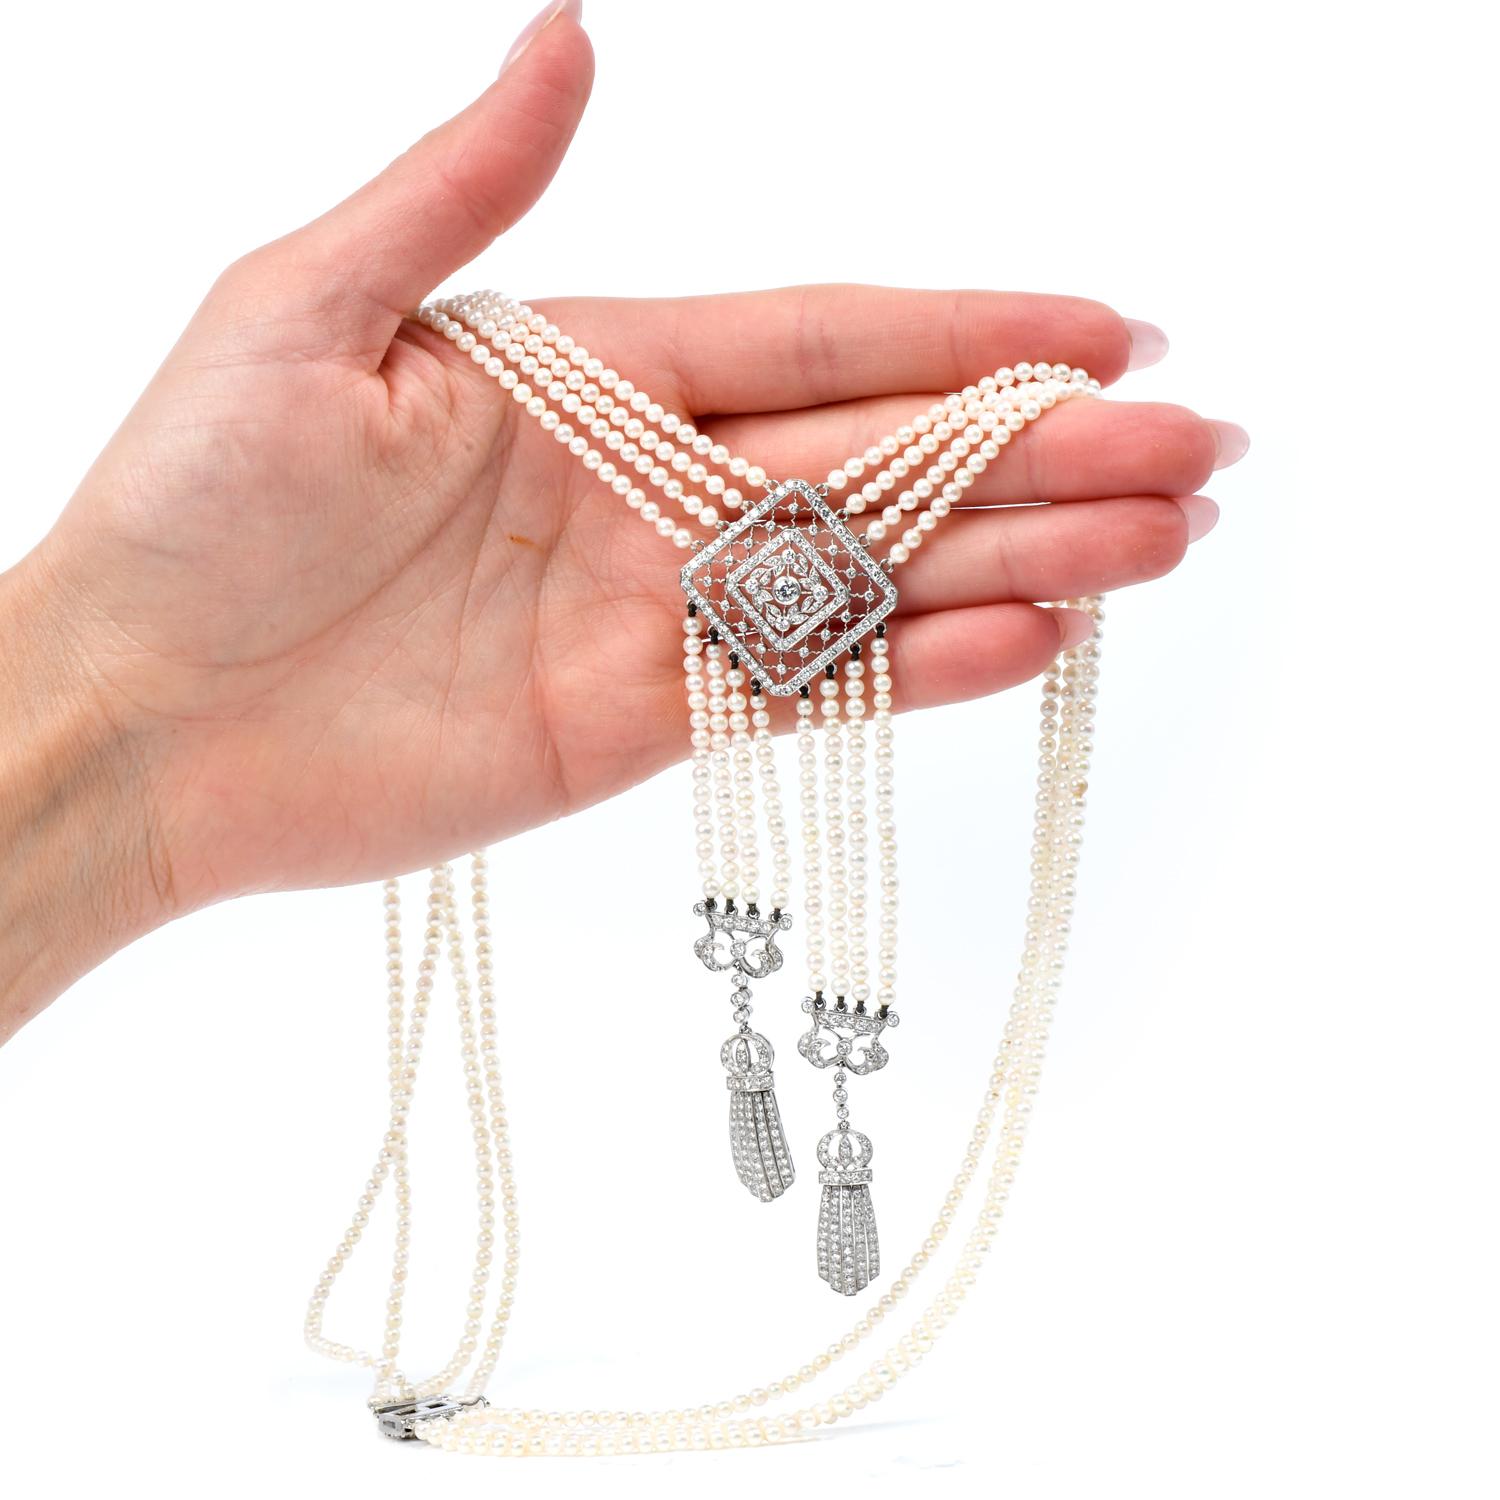 This exquisite Tassel Desing Necklace brings 1920s looks to the modern world. 

A dance of cream tone 3 mm, genuine pearls, adorn the piece and the multiple strands. 
An Art Deco-inspired Clasp, bow-inspired accents & center filigree pendant, are